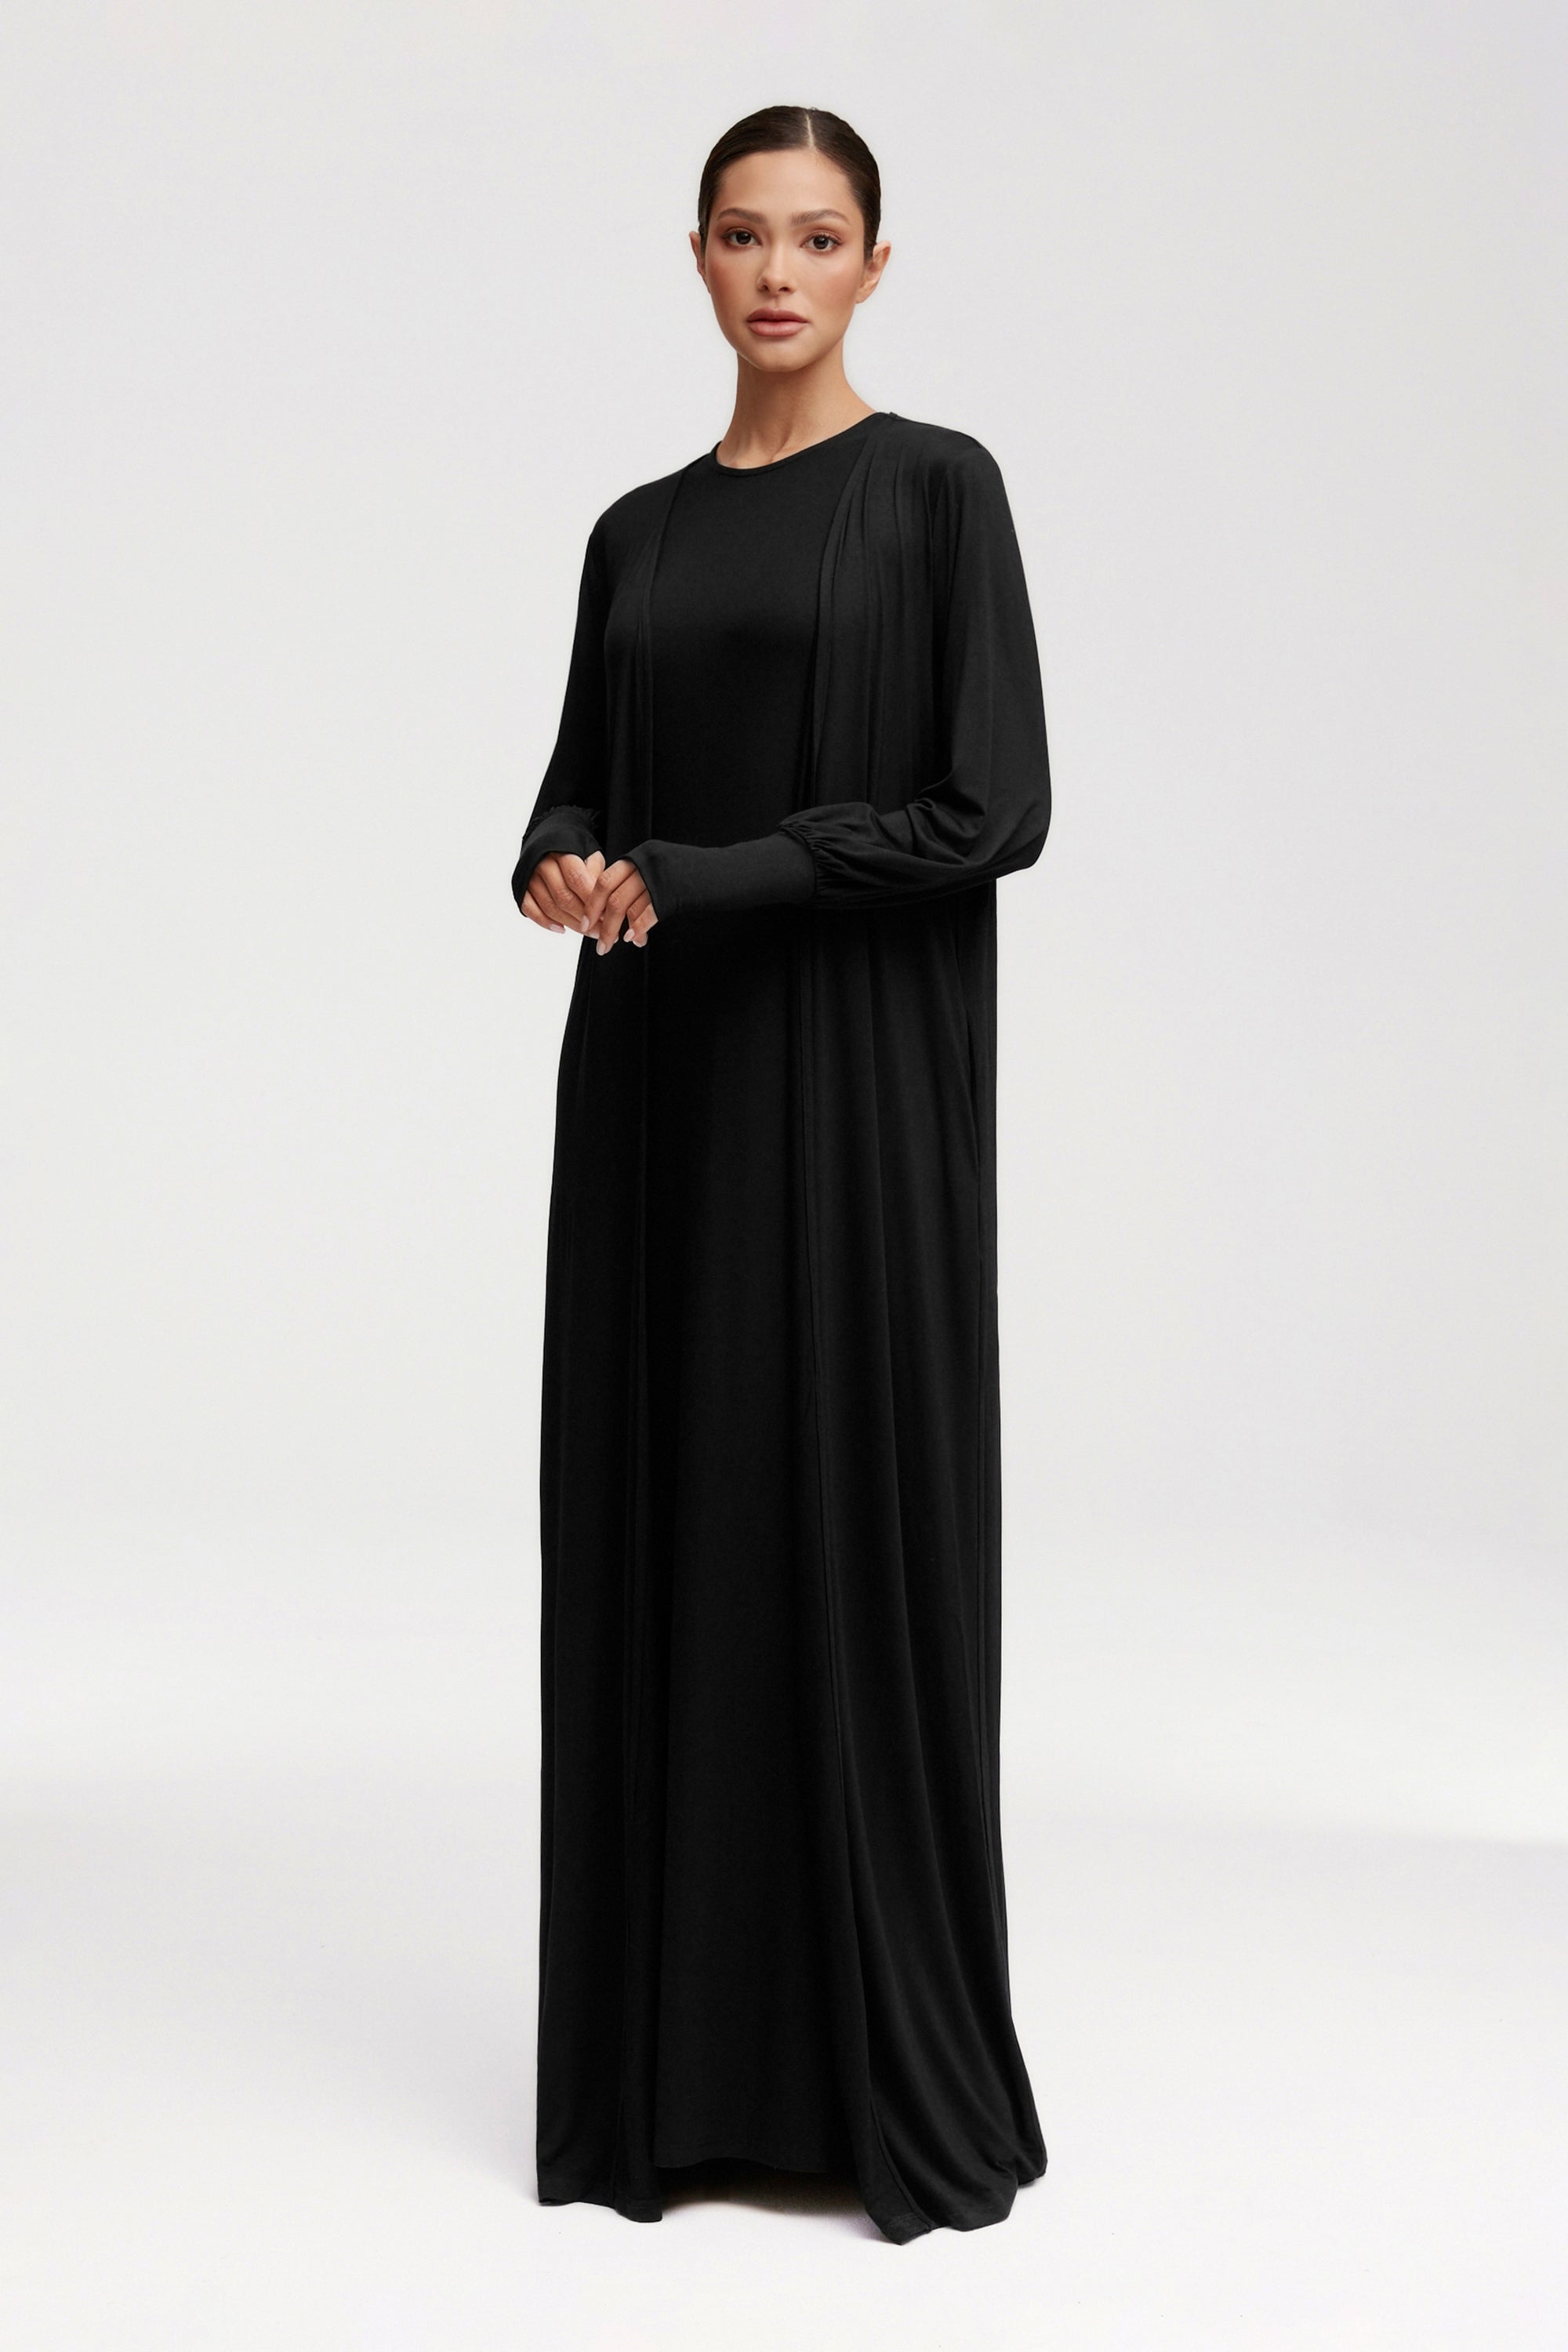 Open Abaya Outfits: What to Wear Under an Abaya